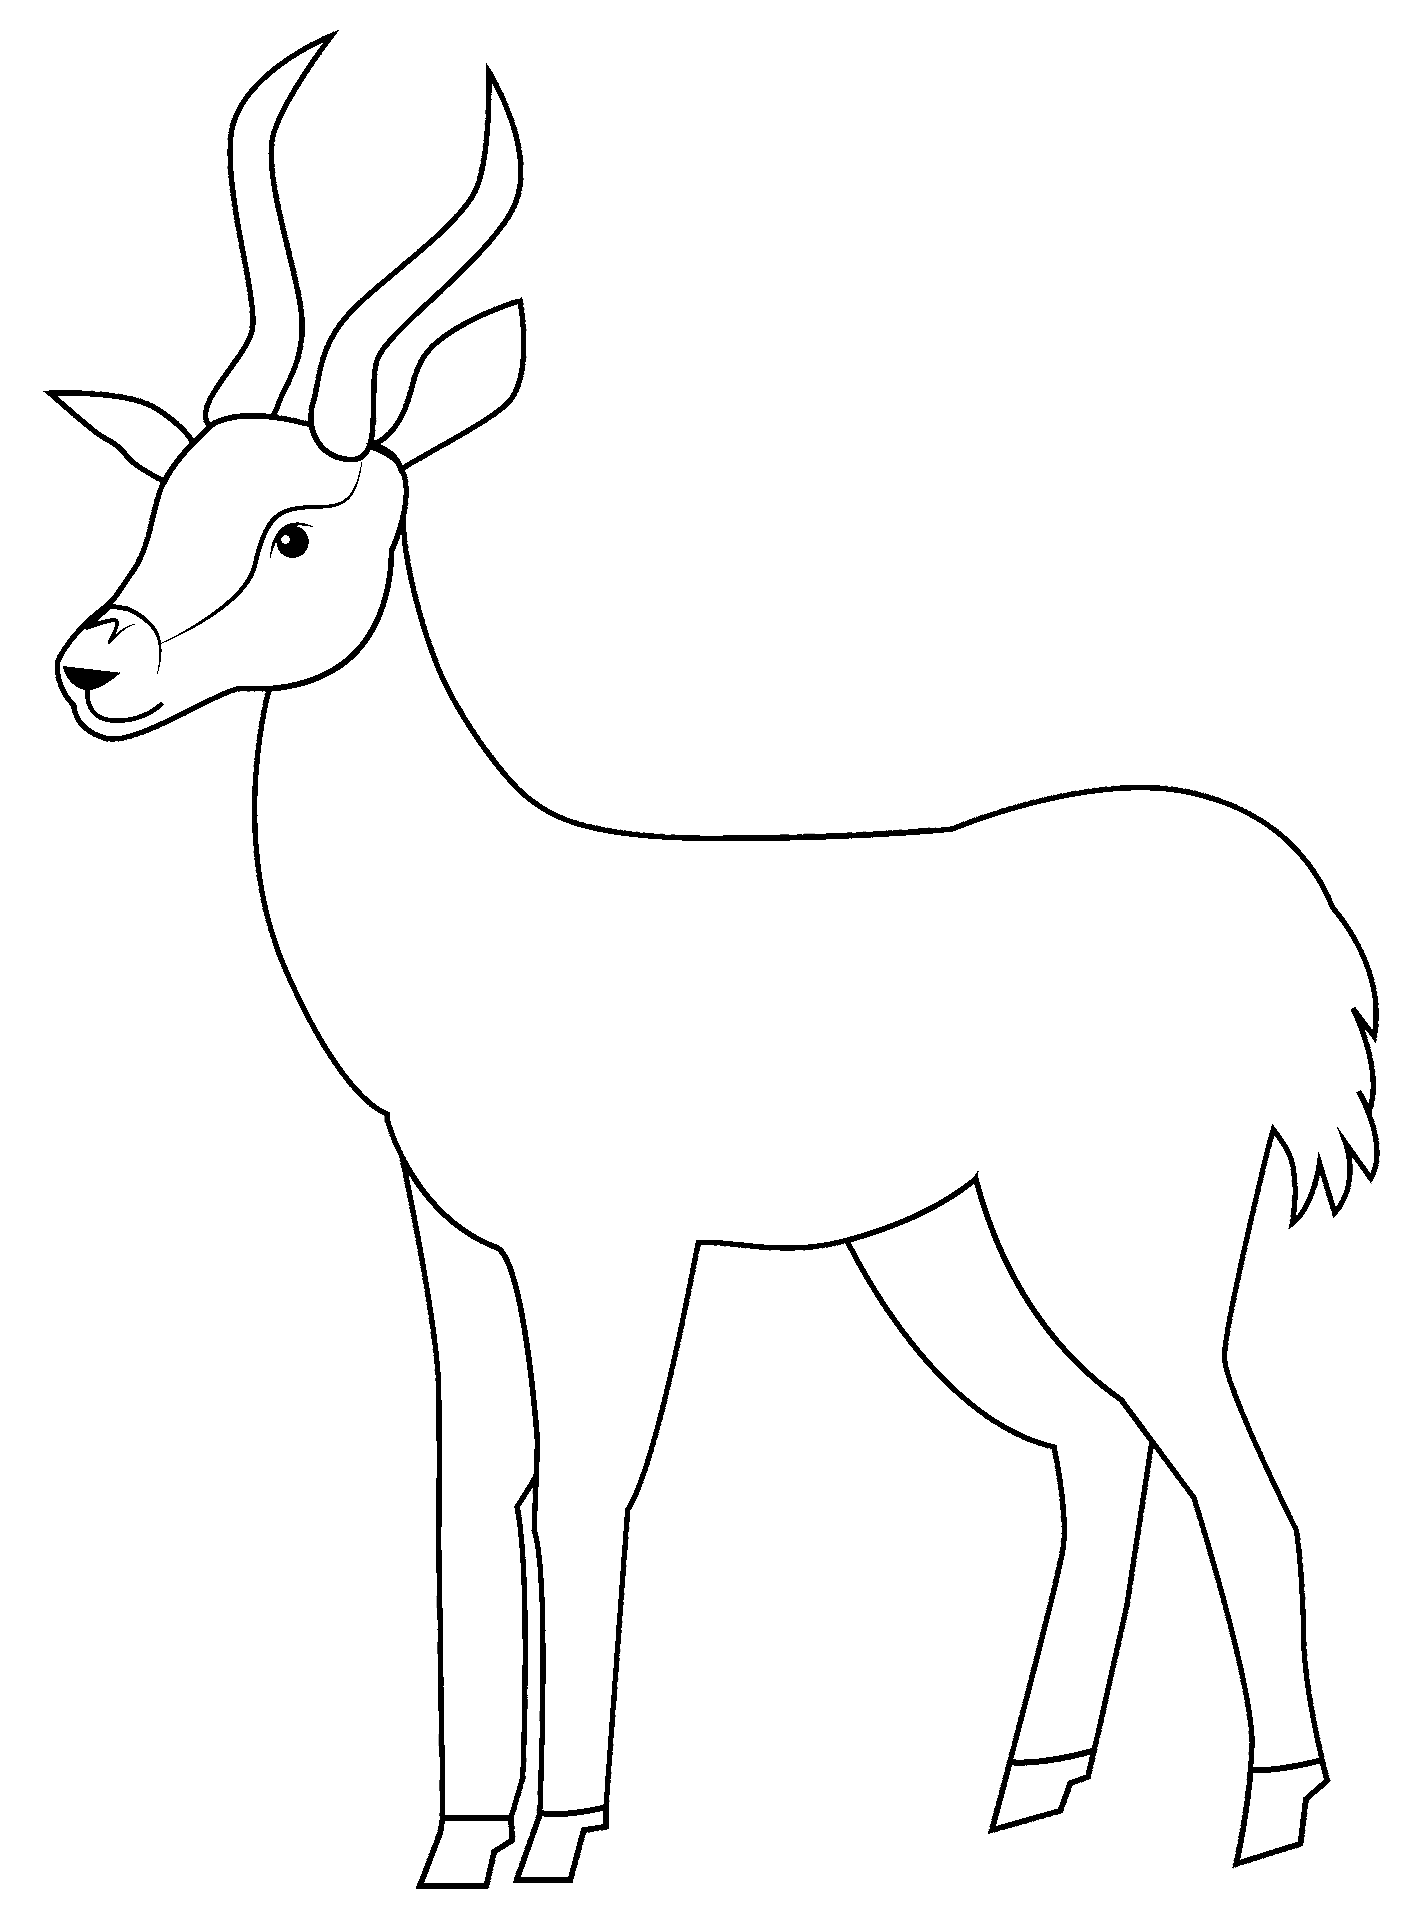 Coloring page of an antelope